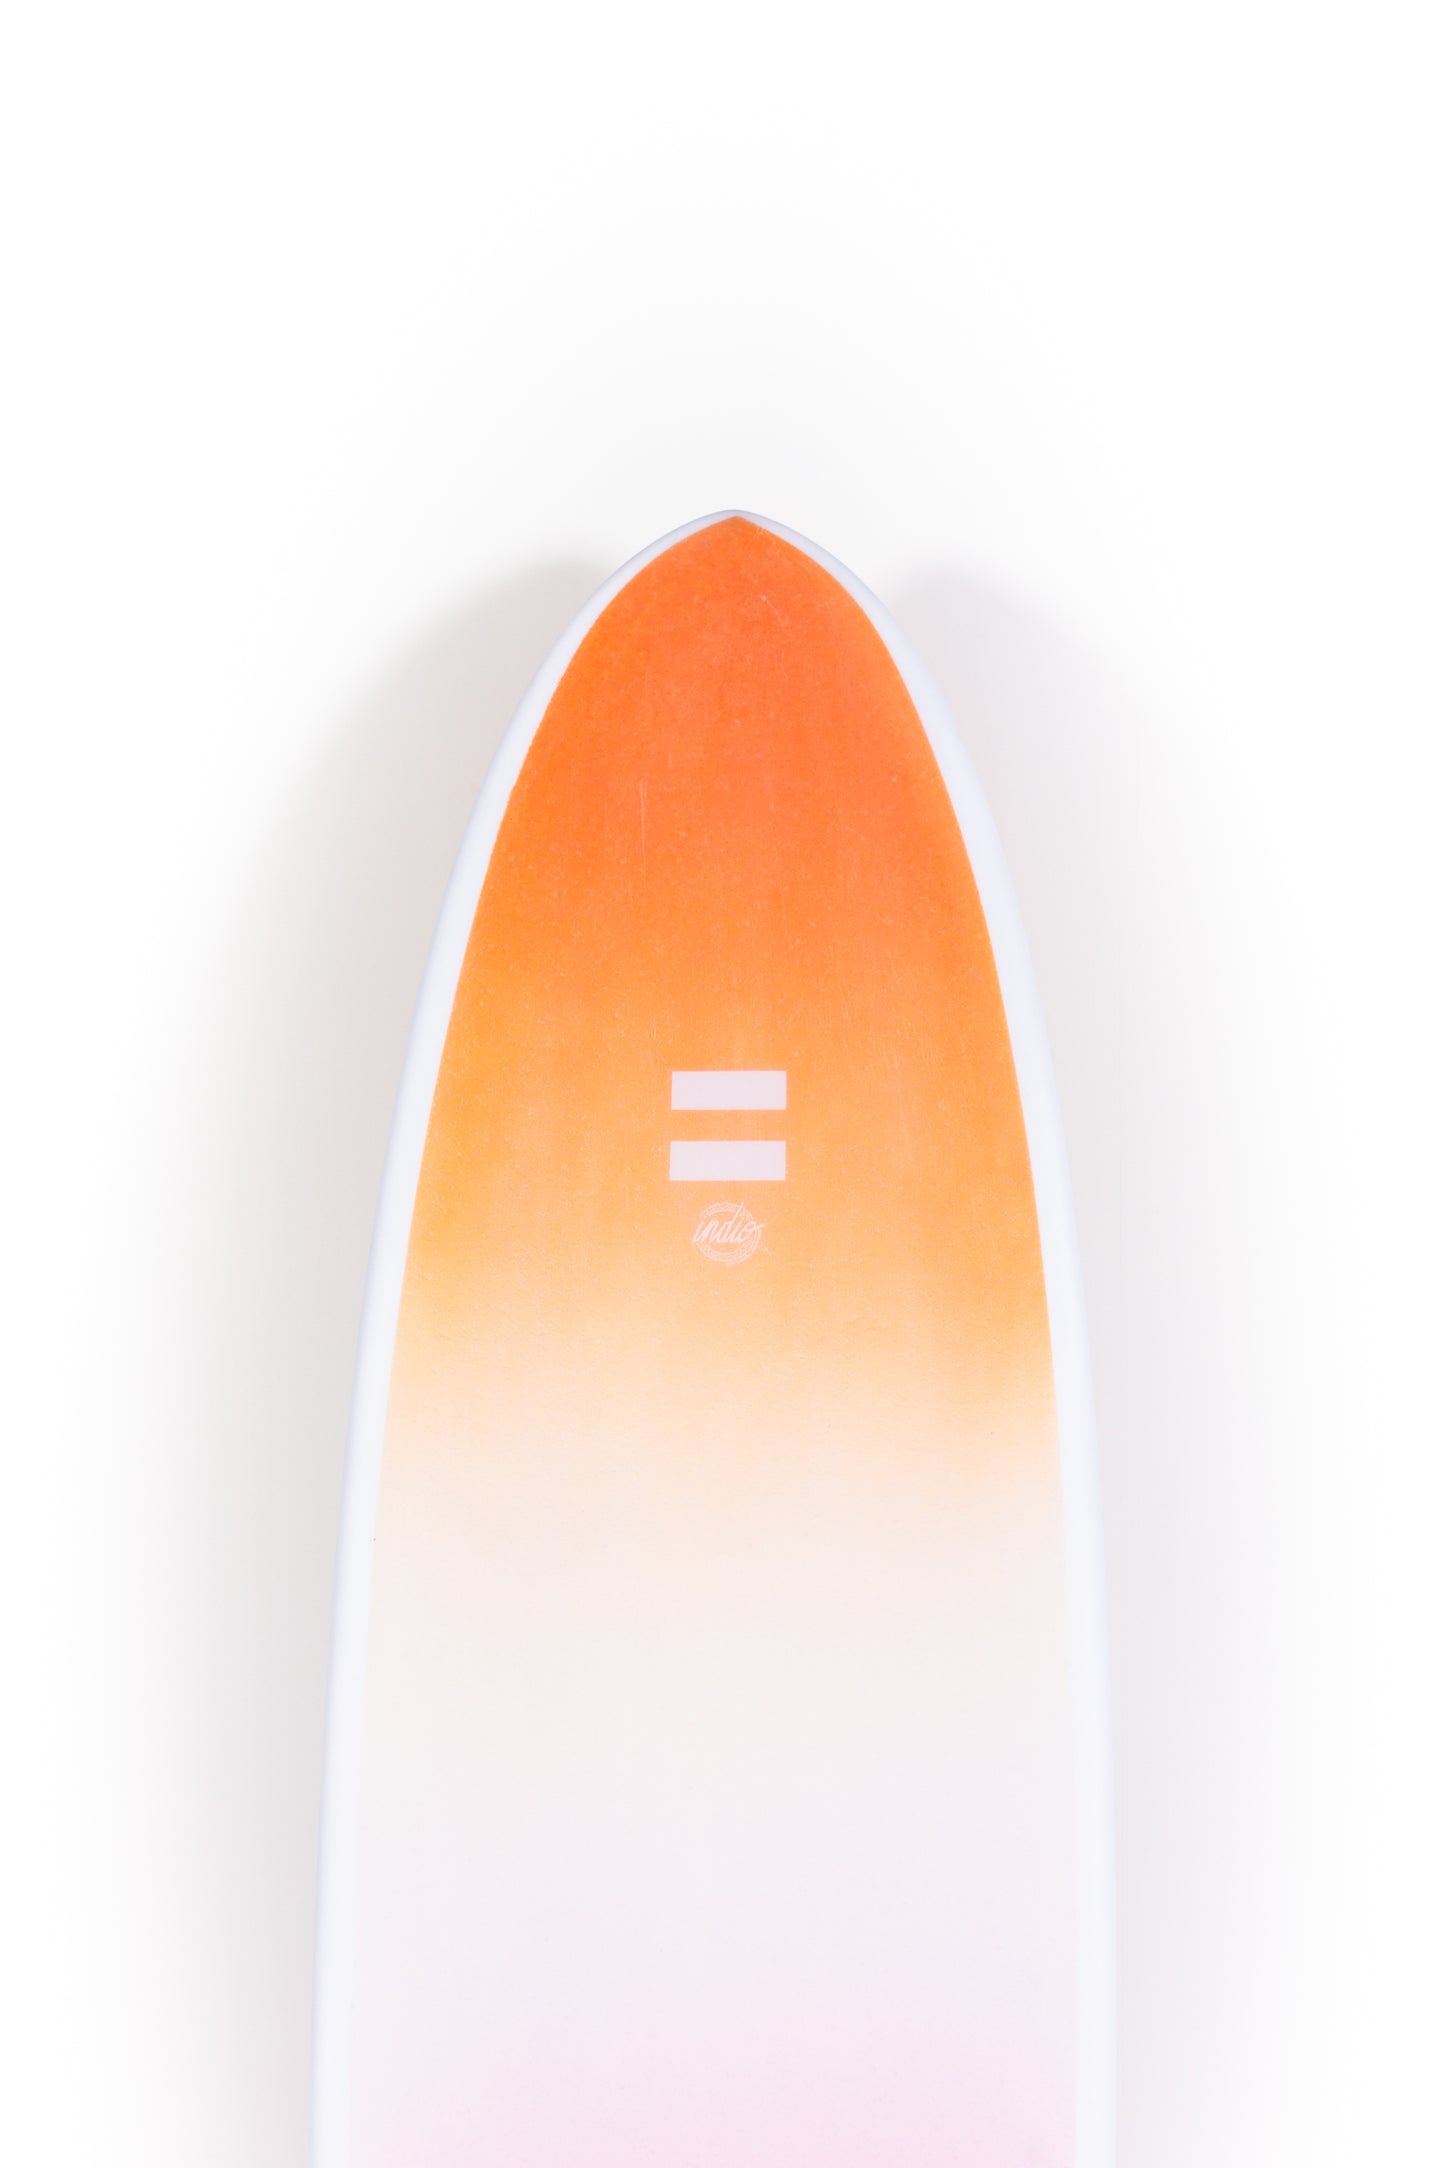 
                  
                    Pukas Surf Shop - Indio Surfboards - THE EGG Space - 7'2" x 21 3/4 x 2 3/4 - 50,50L - TB - INECEG0702SPA
                  
                